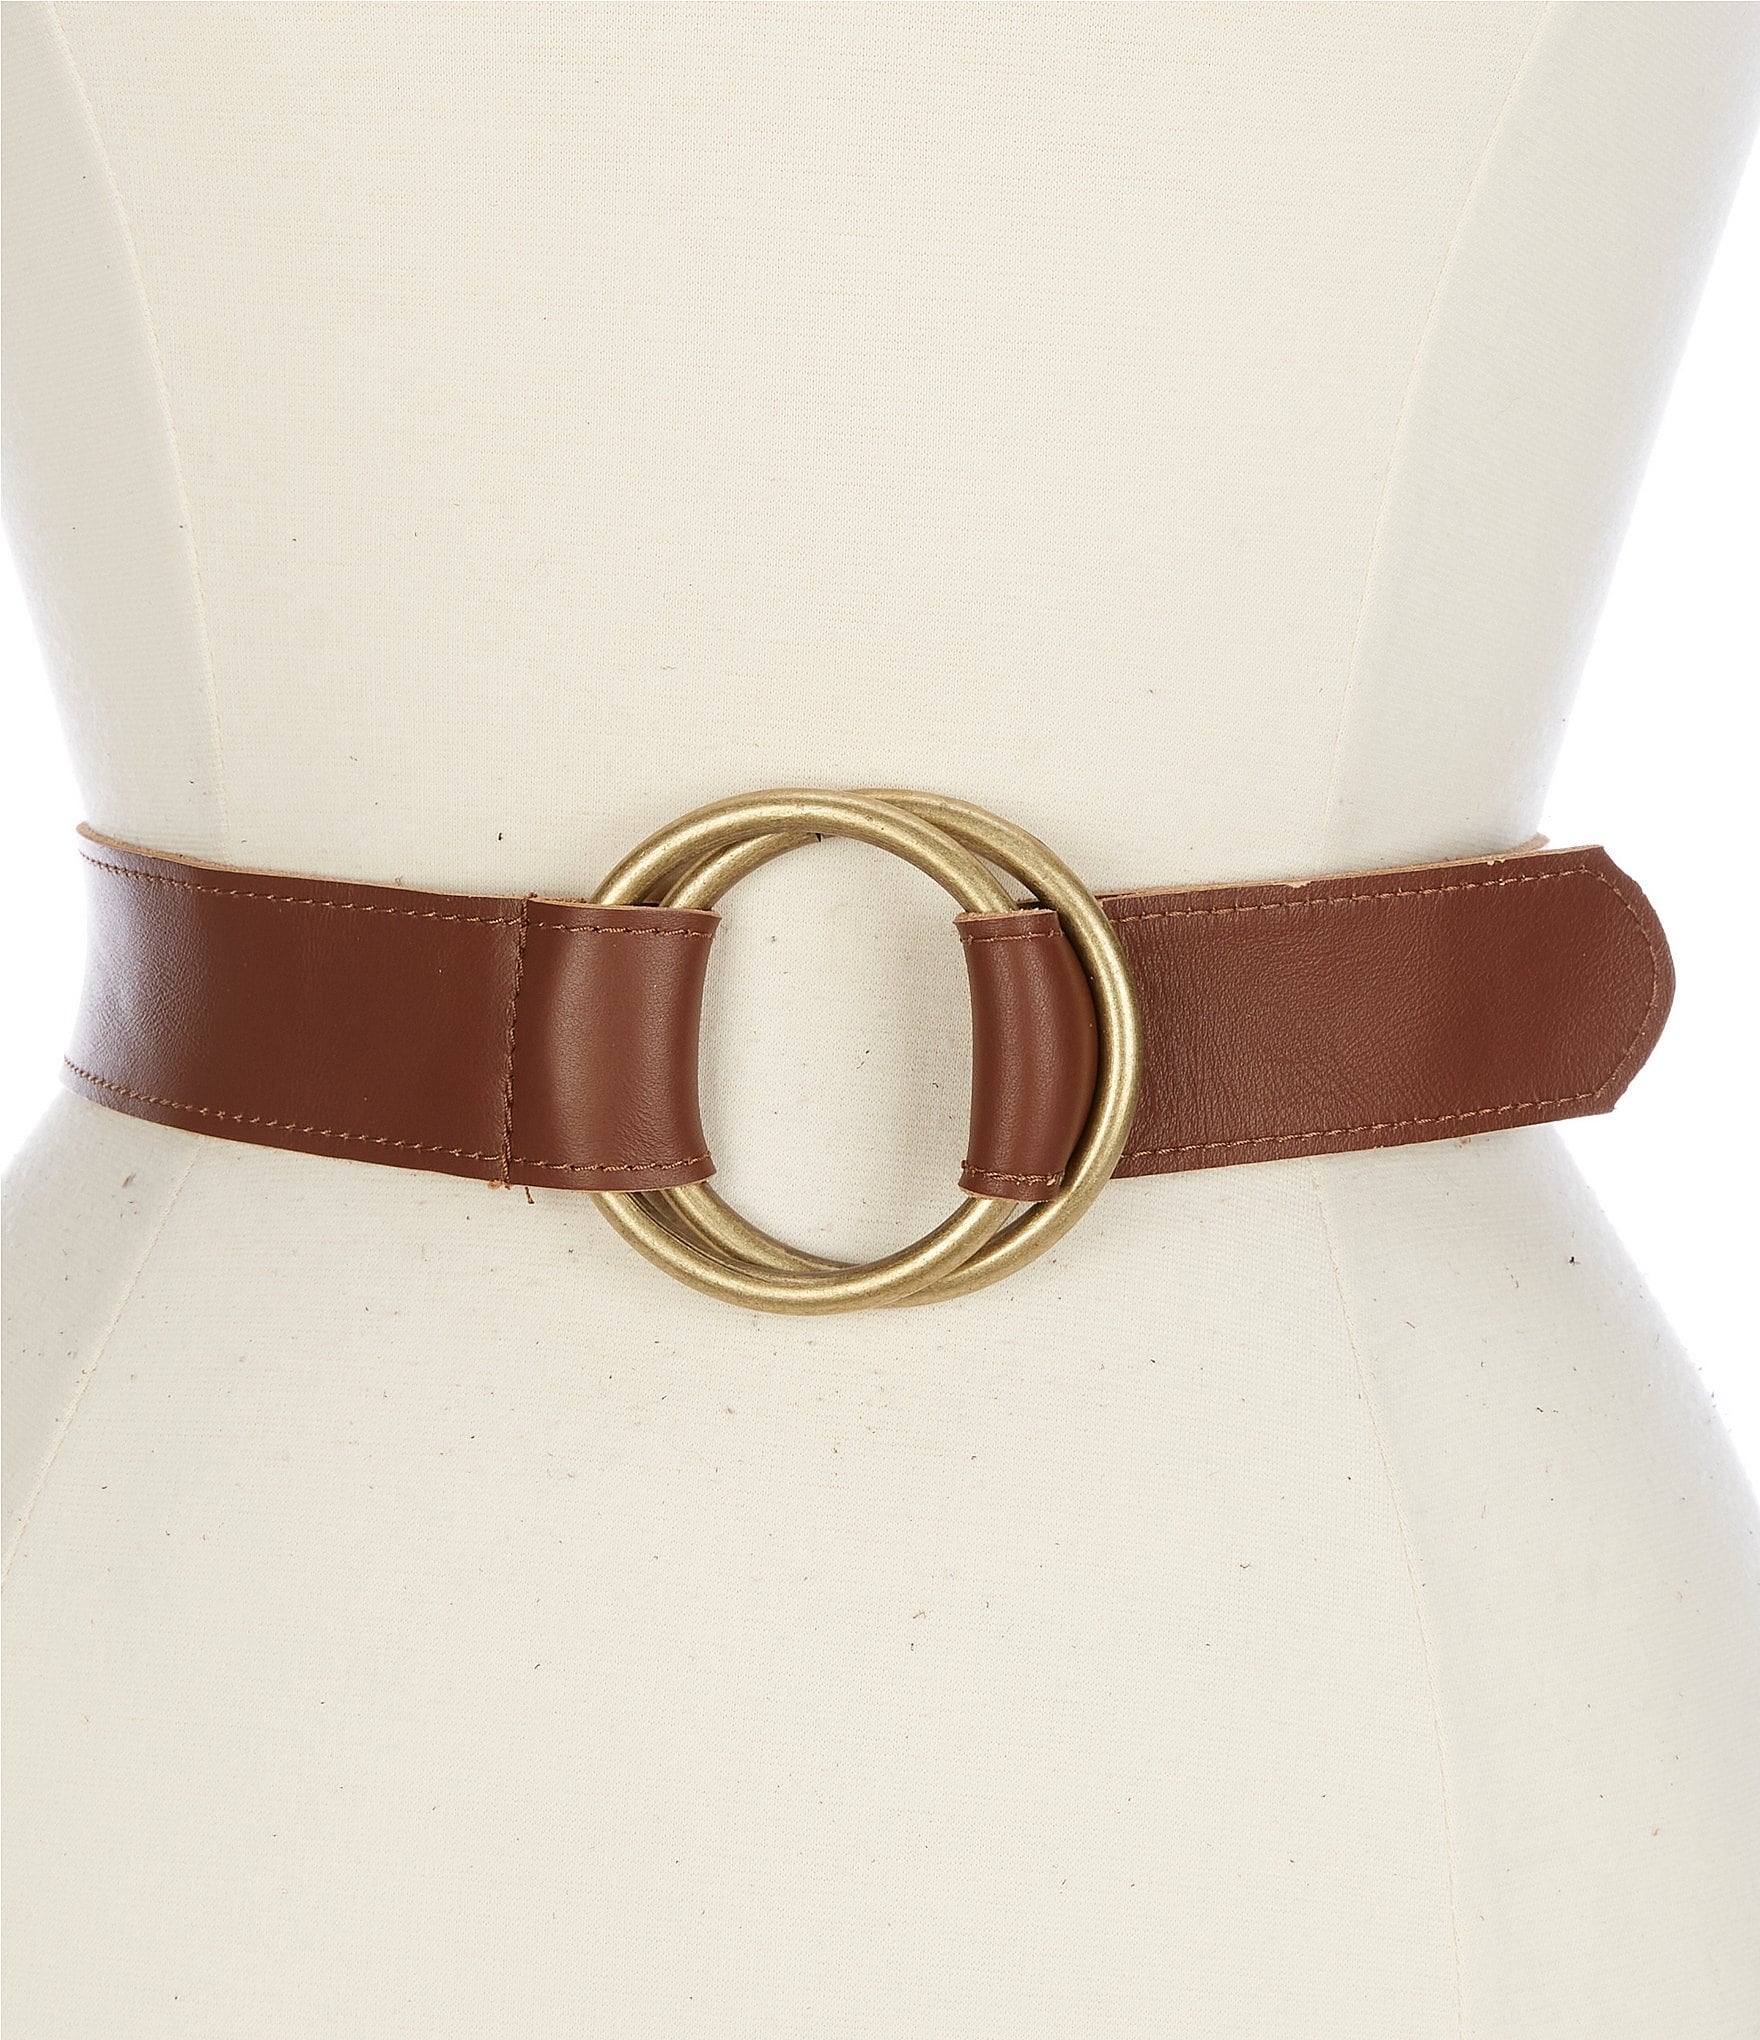 Buy LUKSOFT Double ring belt of PU Leather Punched Hole Fit Belts Upto 38  Inch at Amazon.in